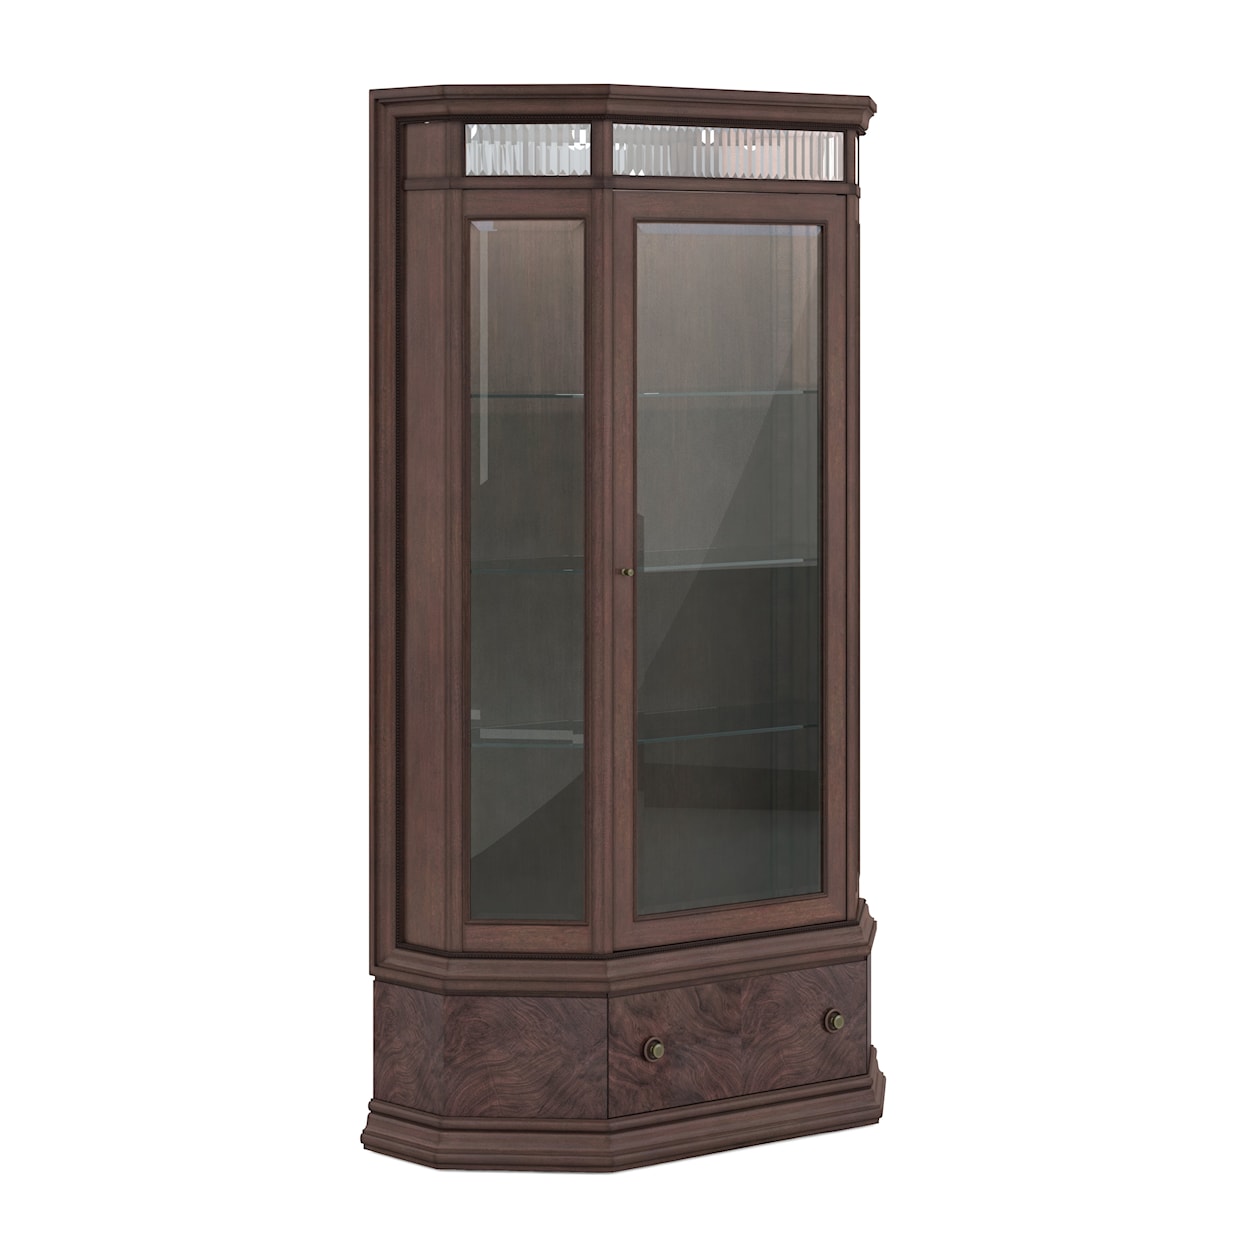 A.R.T. Furniture Inc 328 - Revival Display Cabinet